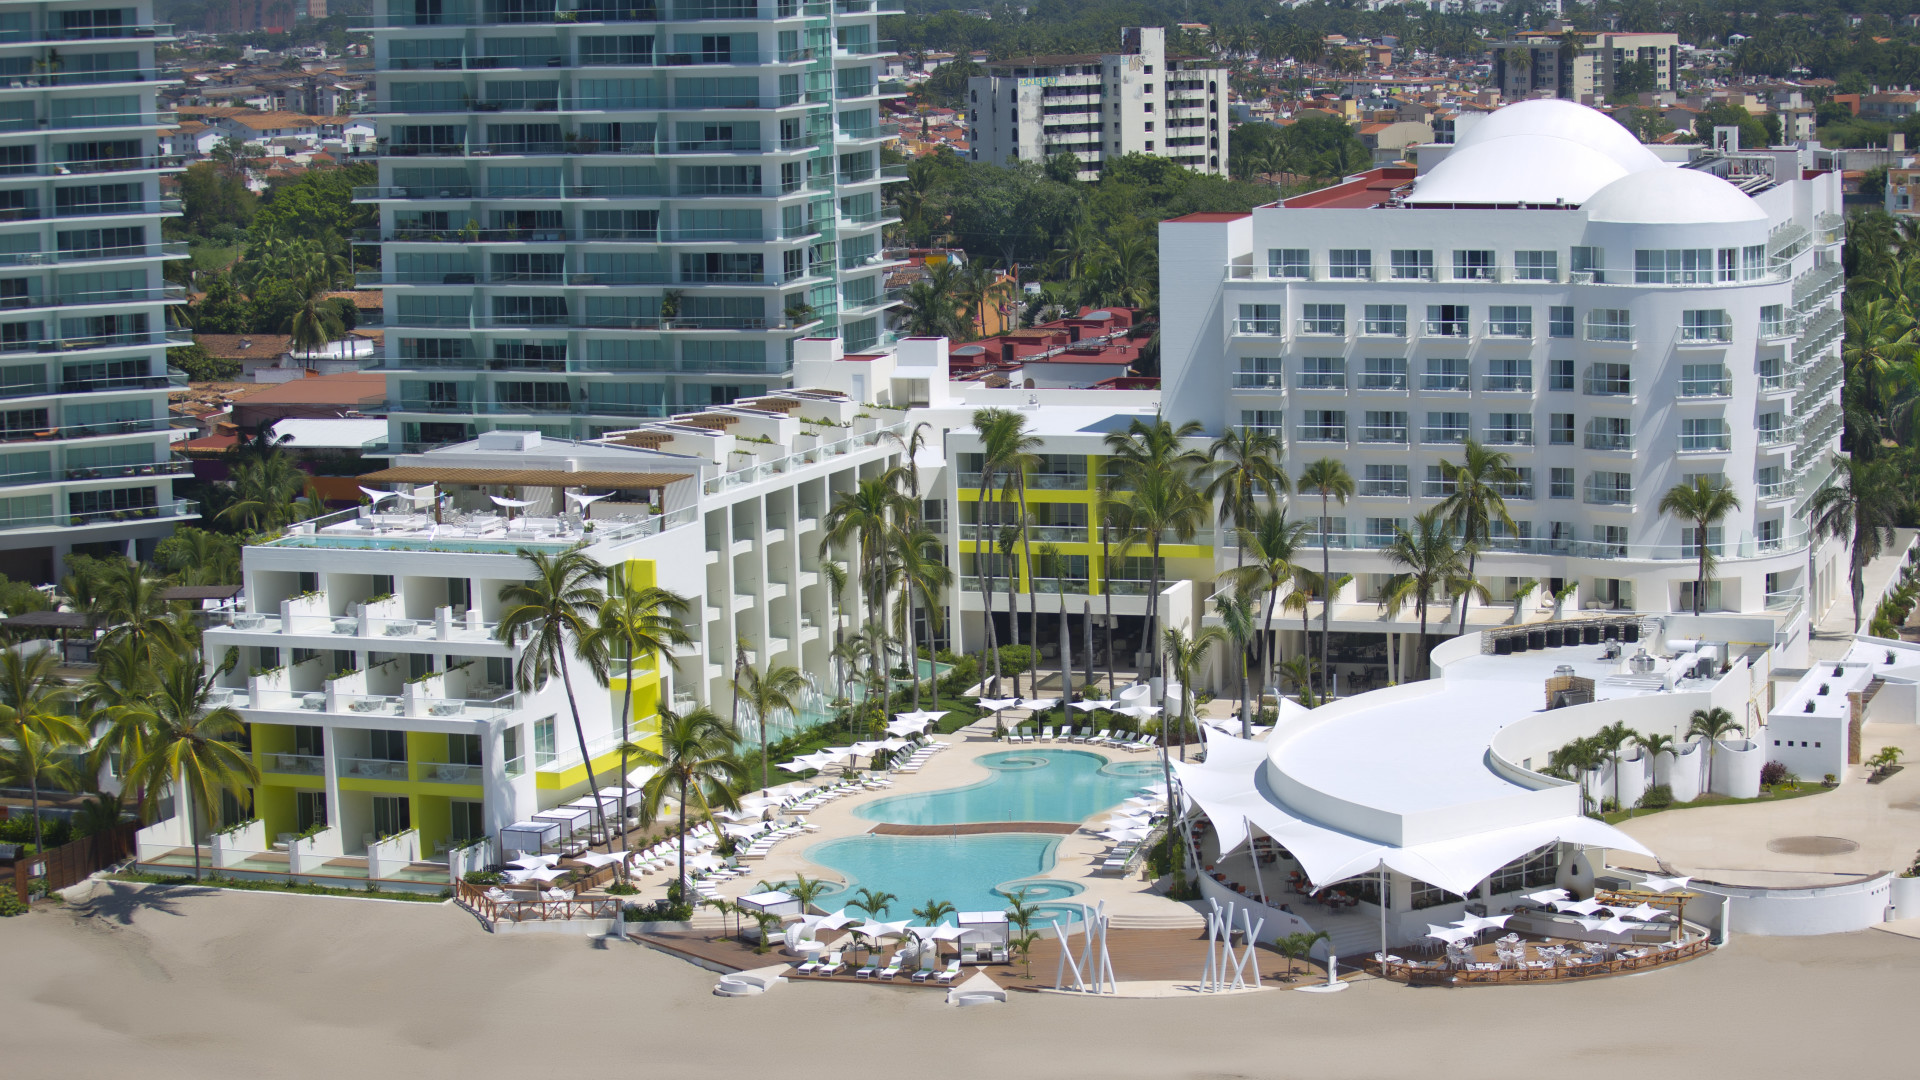 Panoramic view of the hotel and beach